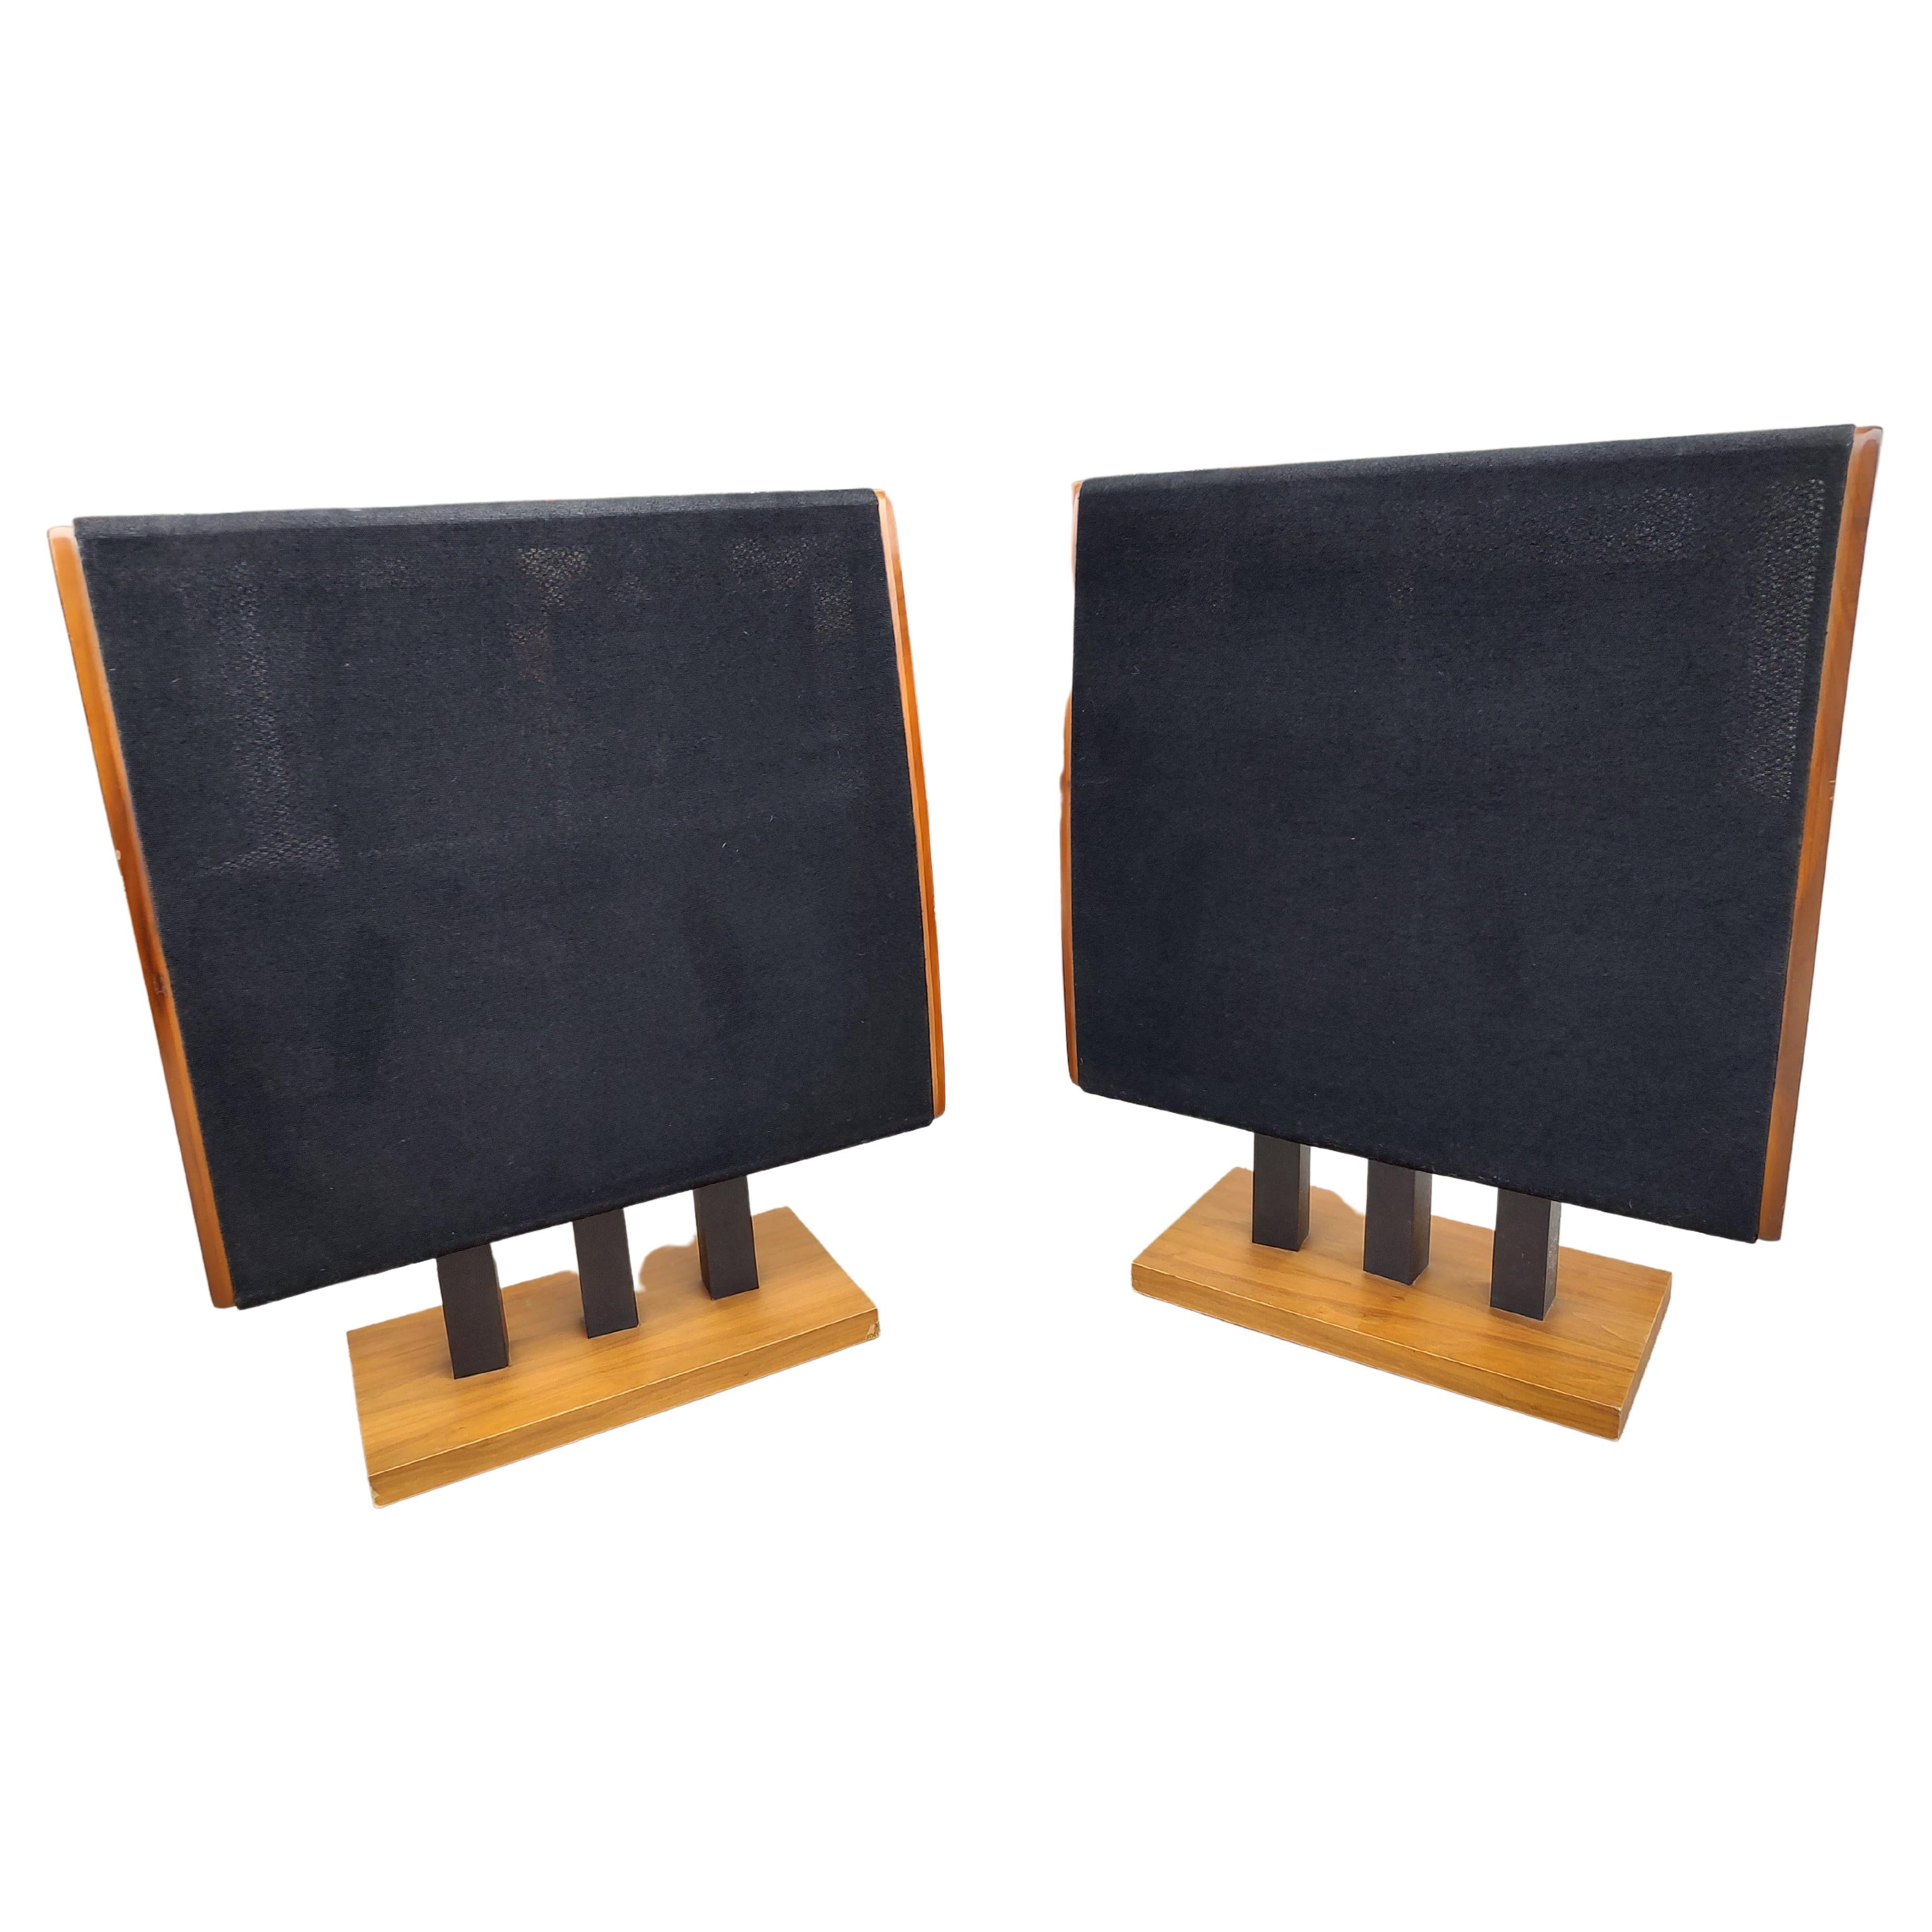 Mid-Century Modern Pair of Dahlquist Dq-10 Speakers on Stands at 1stDibs |  dahlquist dq-10 for sale, dahlquist dq-10 stands, dahlquist dq 10 for sale